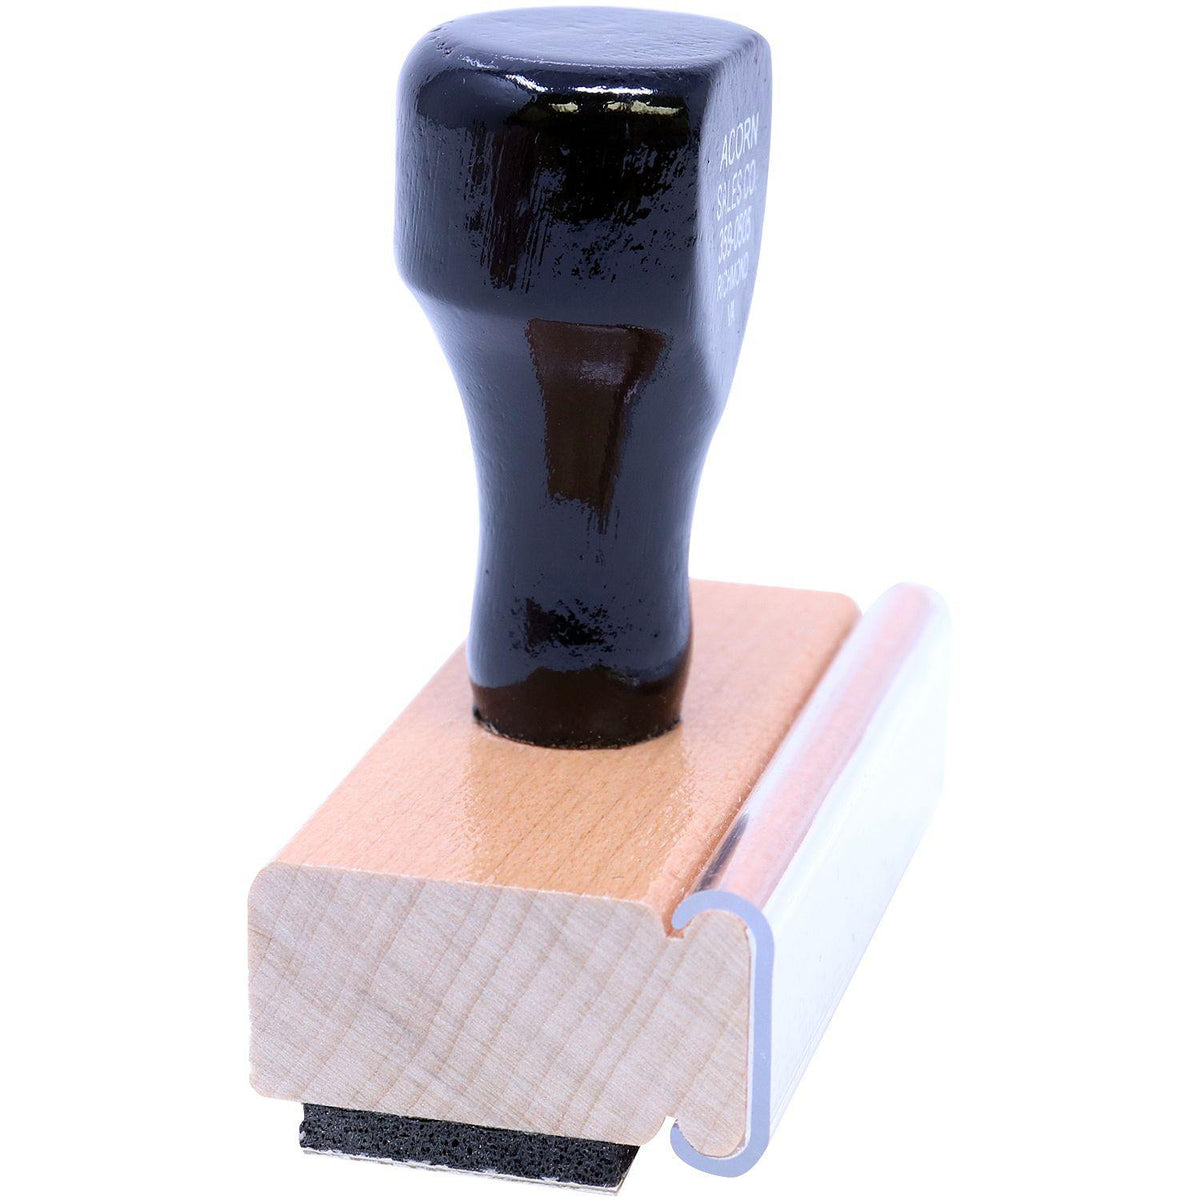 Narrow Font Non-Smoker Rubber Stamp - Engineer Seal Stamps - Brand_Acorn, Impression Size_Small, Stamp Type_Regular Stamp, Type of Use_Medical Office